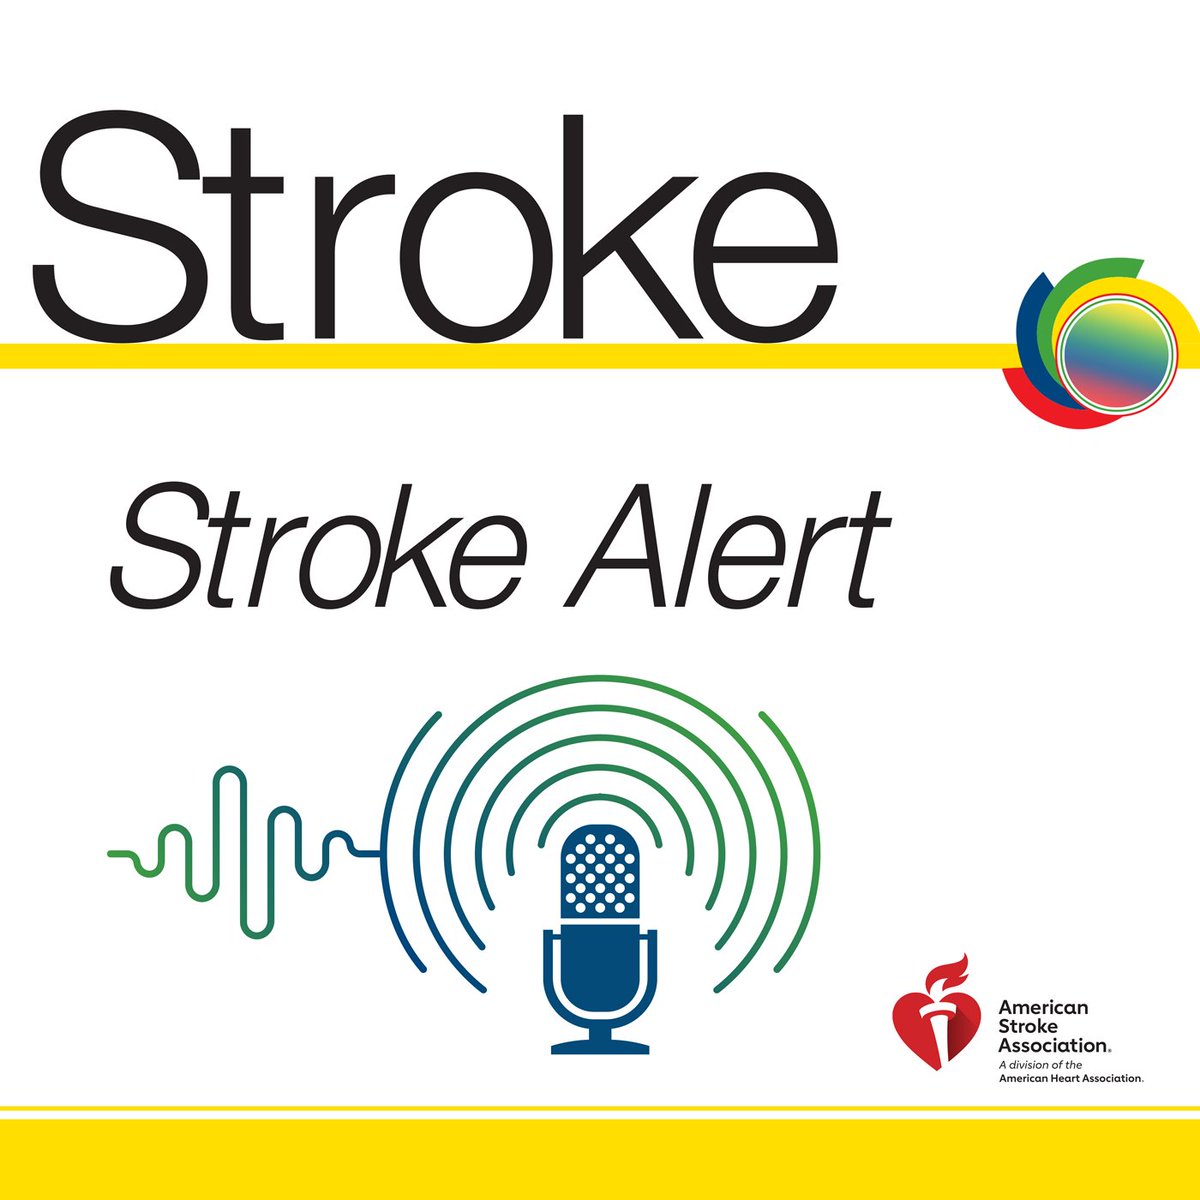 The May episode of the #StrokeAlert Podcast is now available! In this episode, host @NAsdaghi highlights articles in the May issue of #Stroke and interviews @SusanneVanVeluw on the topic of cerebral amyloid angiopathy. #AHAJournals @SMGreenbergNeur ahajournals.org/do/10.1161/pod…